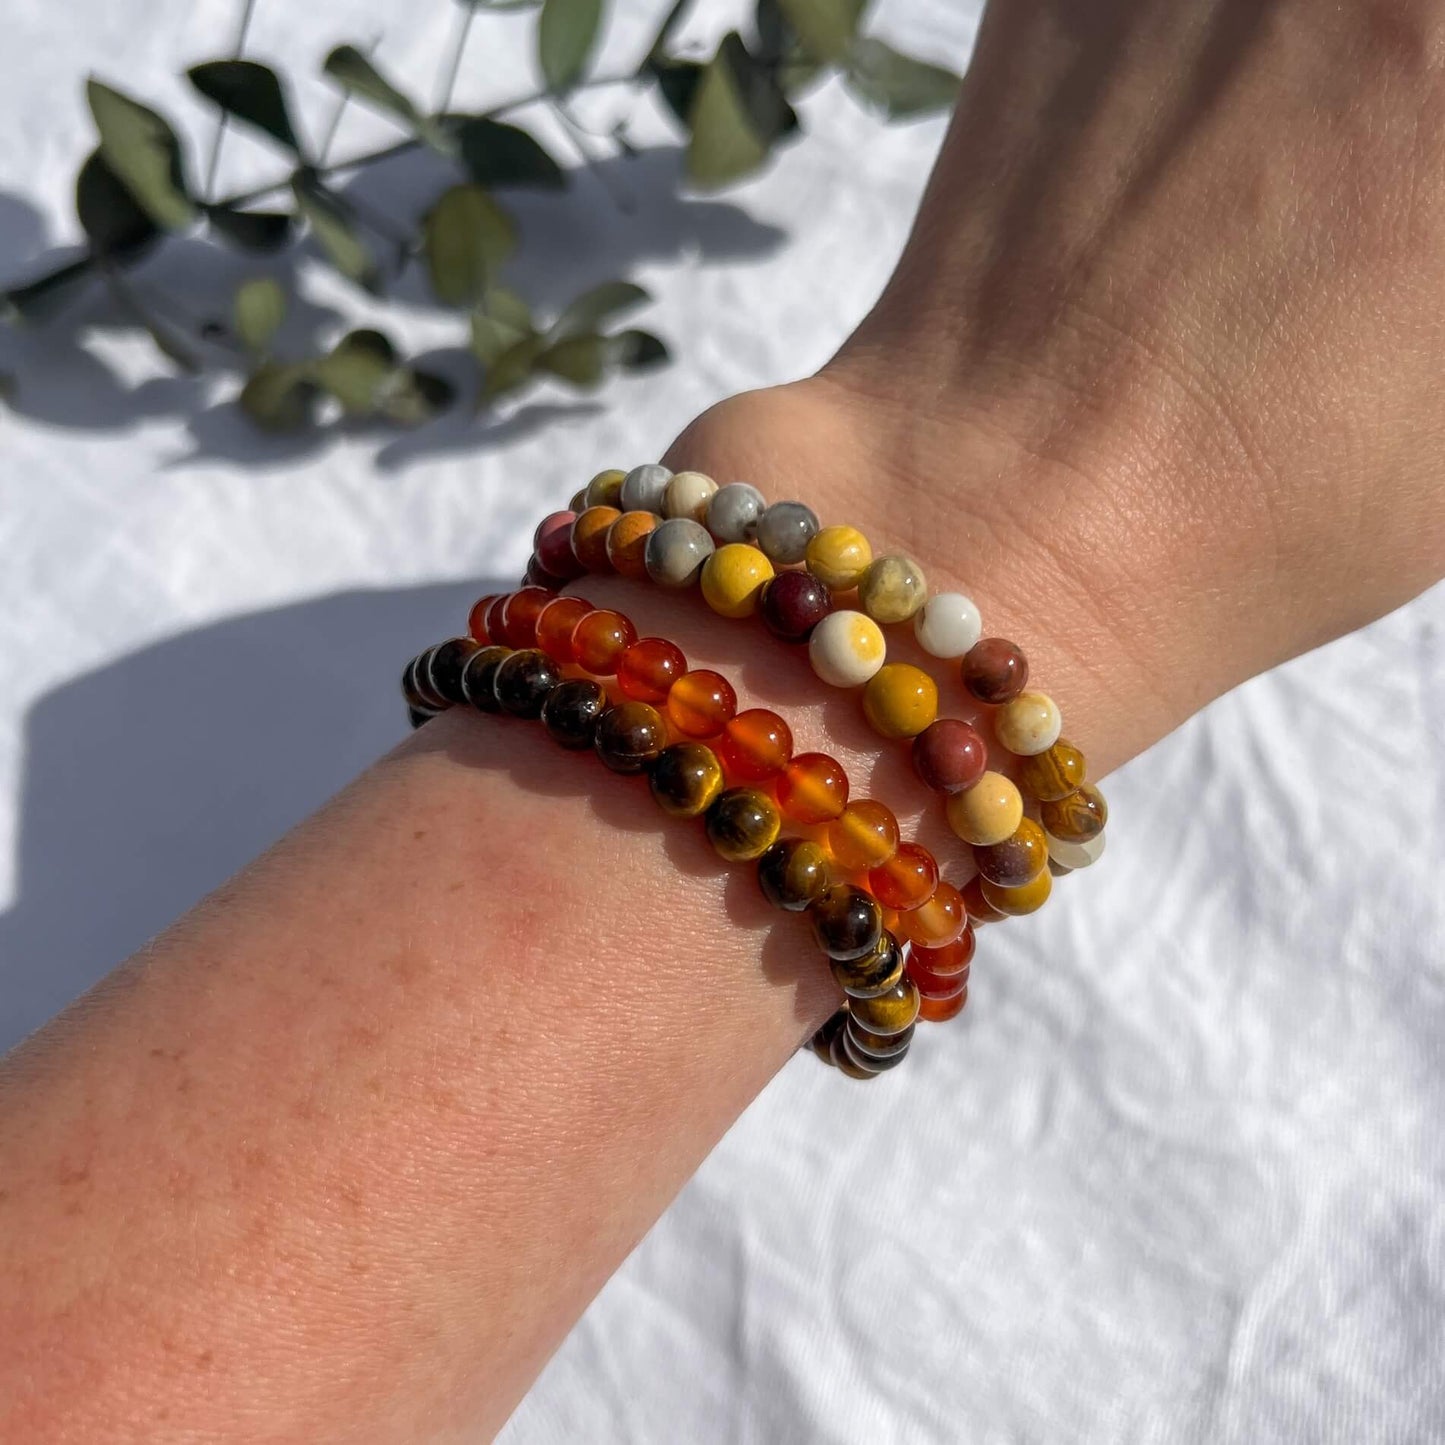 A lady's wrist with vivid white, yellow, orange & red crystal bead bracelets in carnelian, mookaite, tiger's eye and crazy lace agate